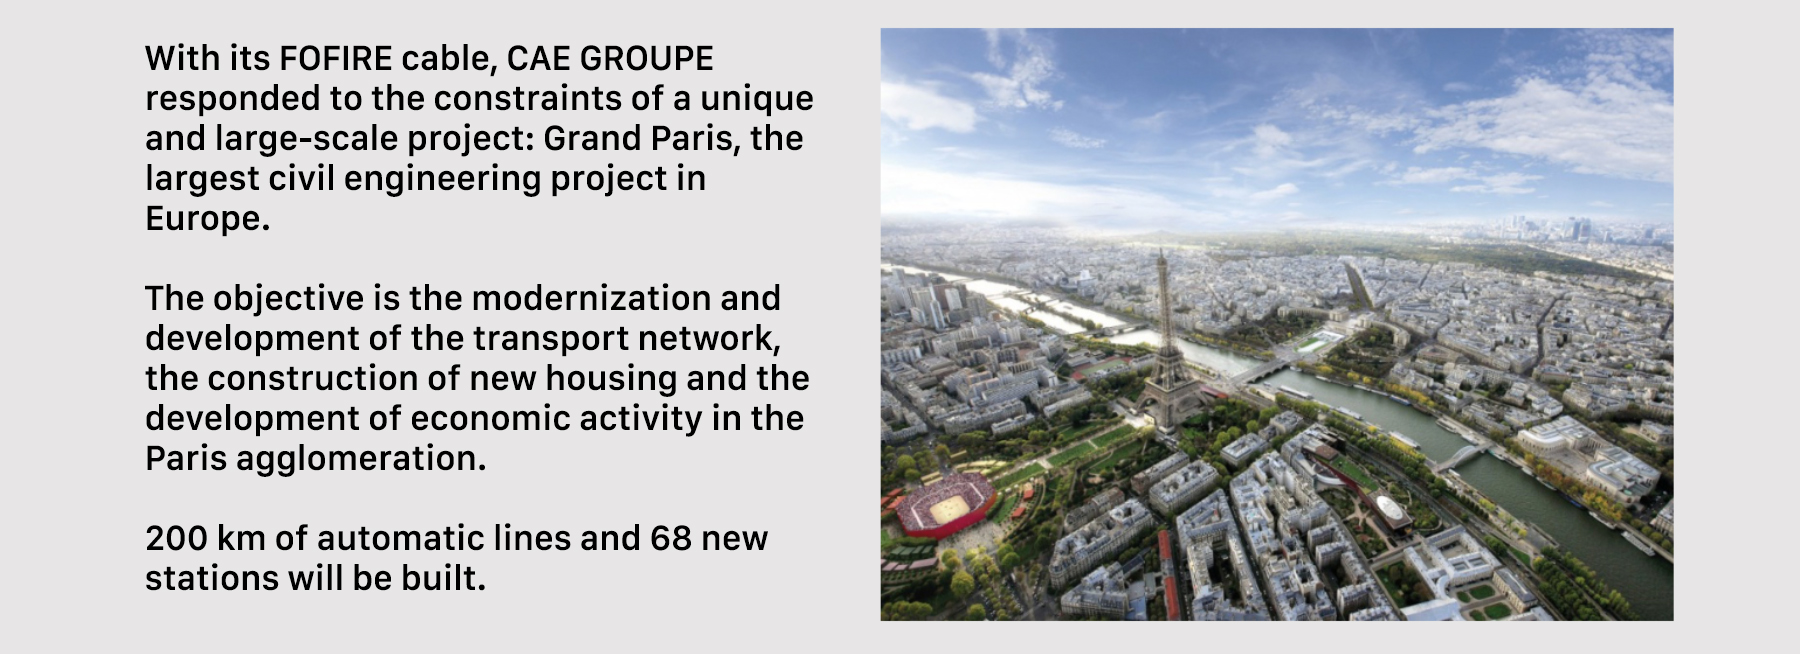 Project CAE groupe